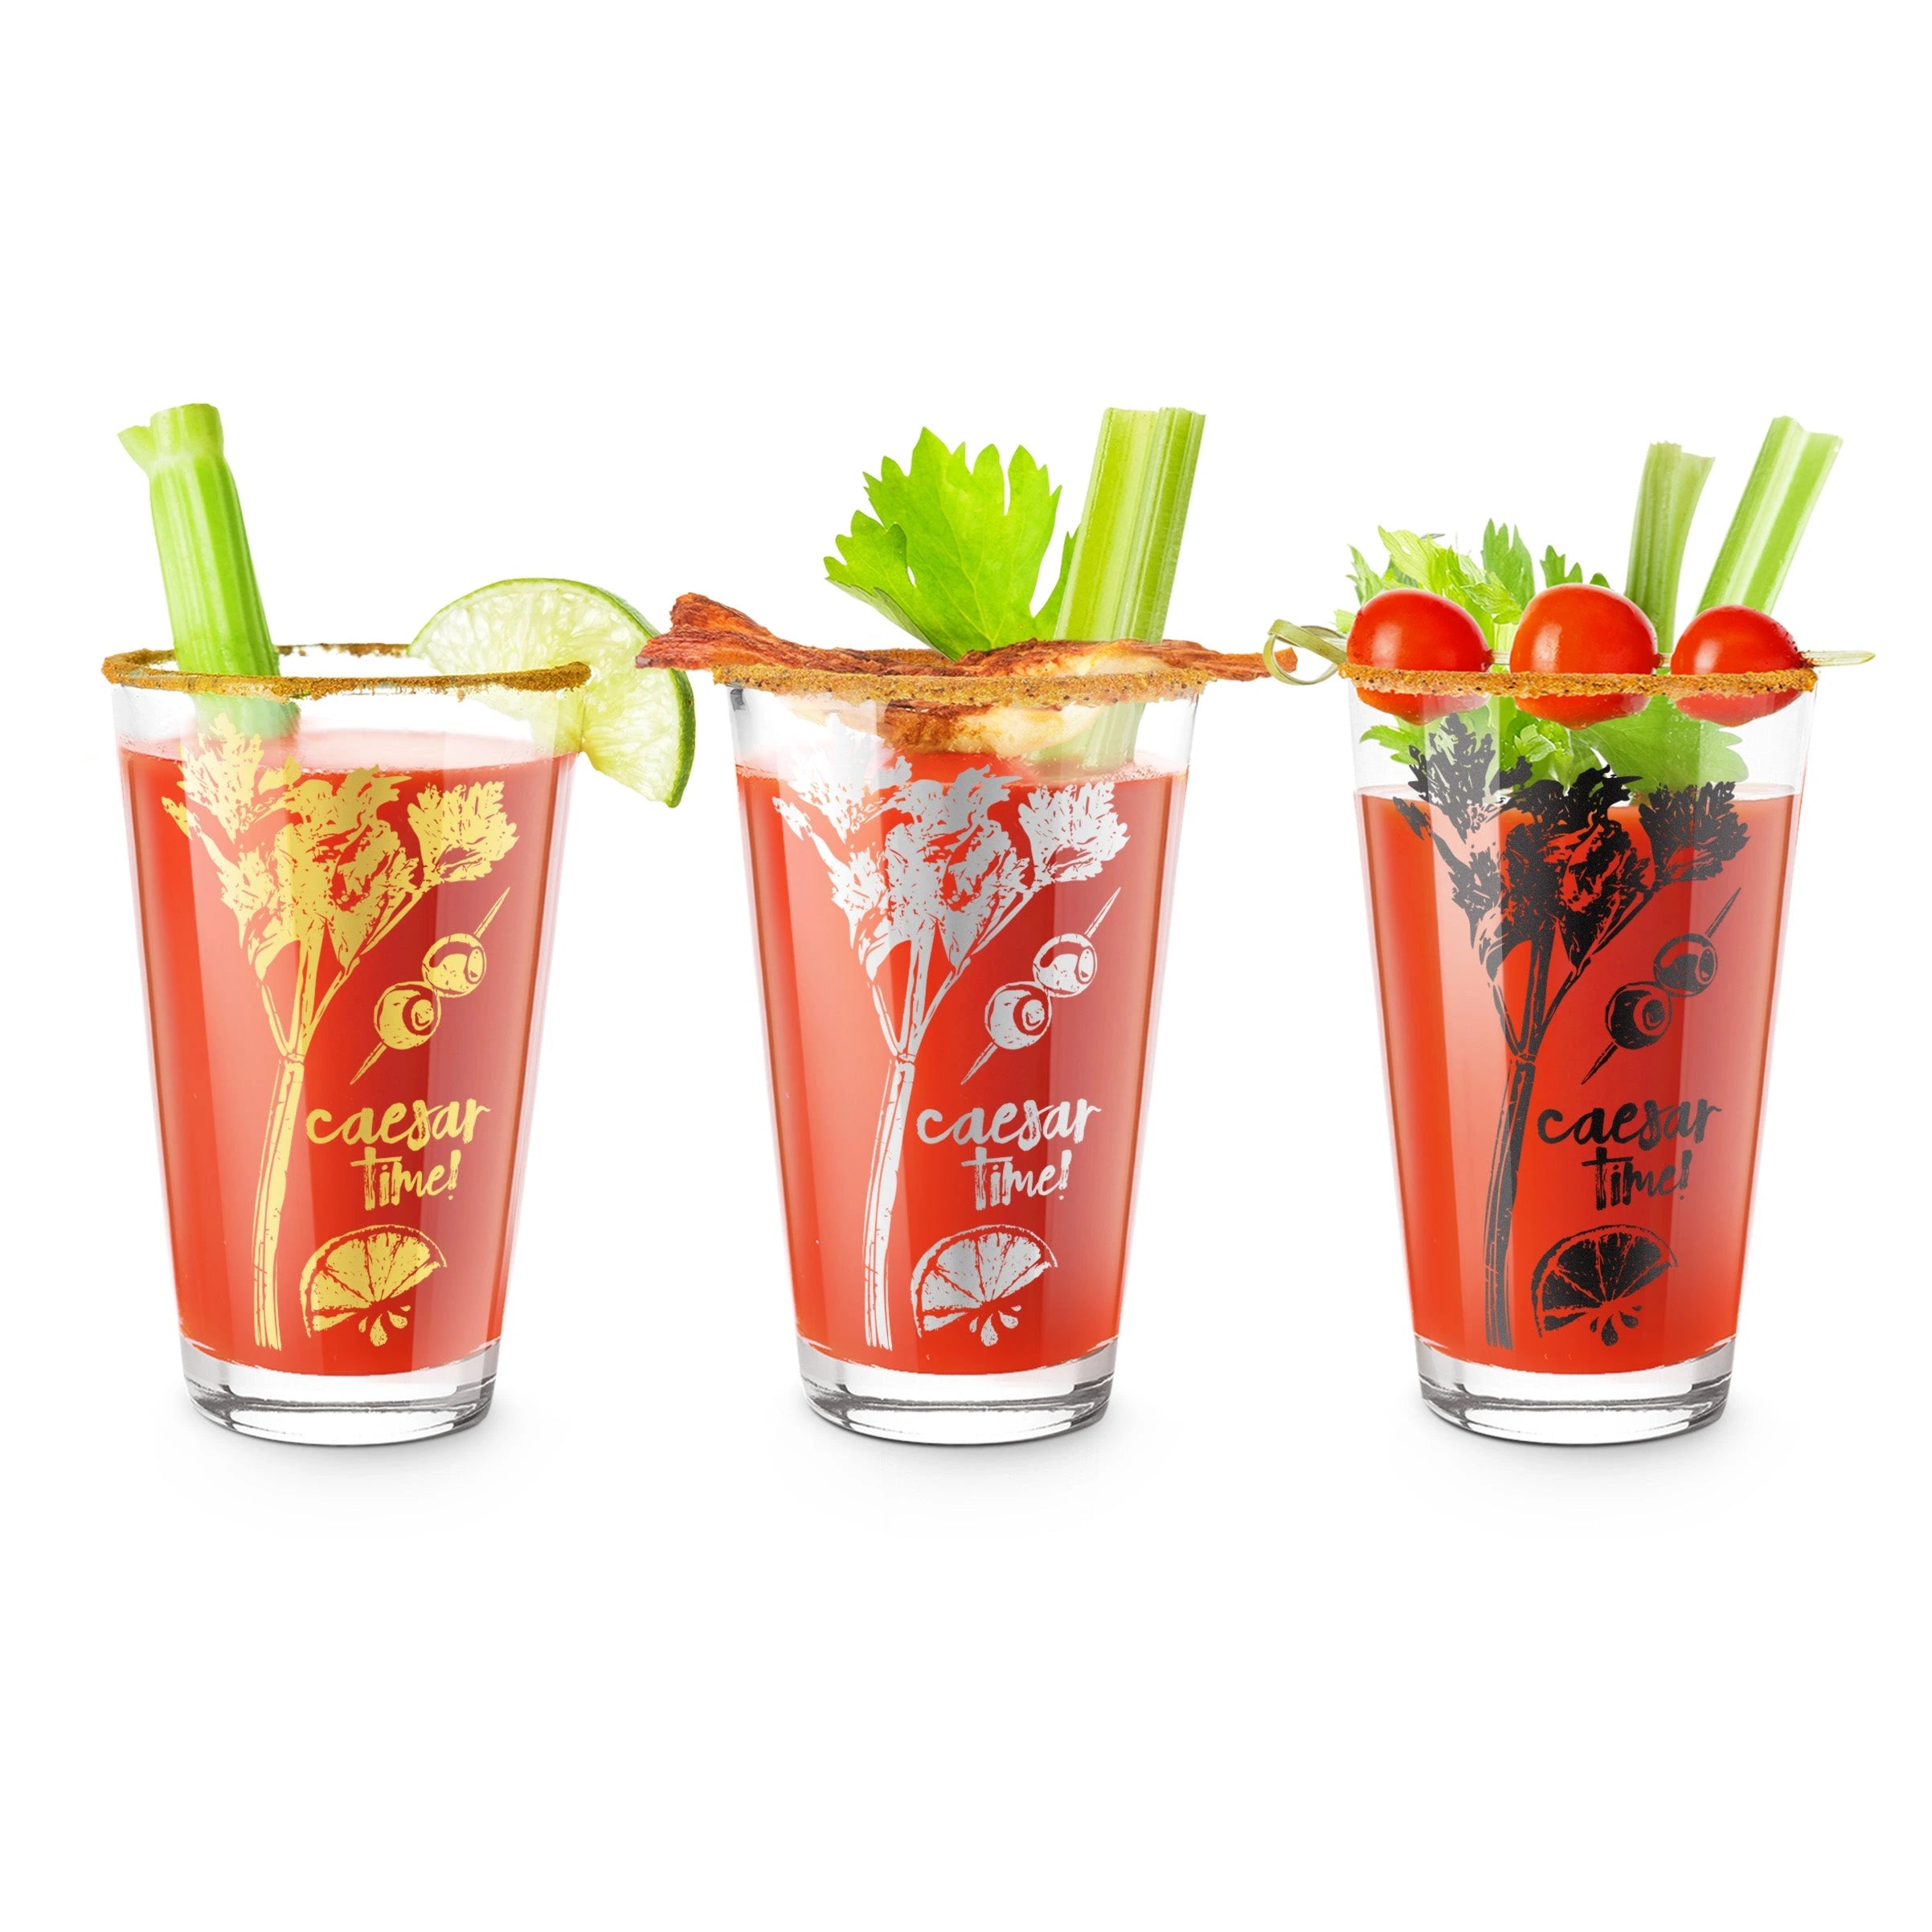 FINAL TOUCH CAESAR TIME COCKTAIL GLASSES 3PK